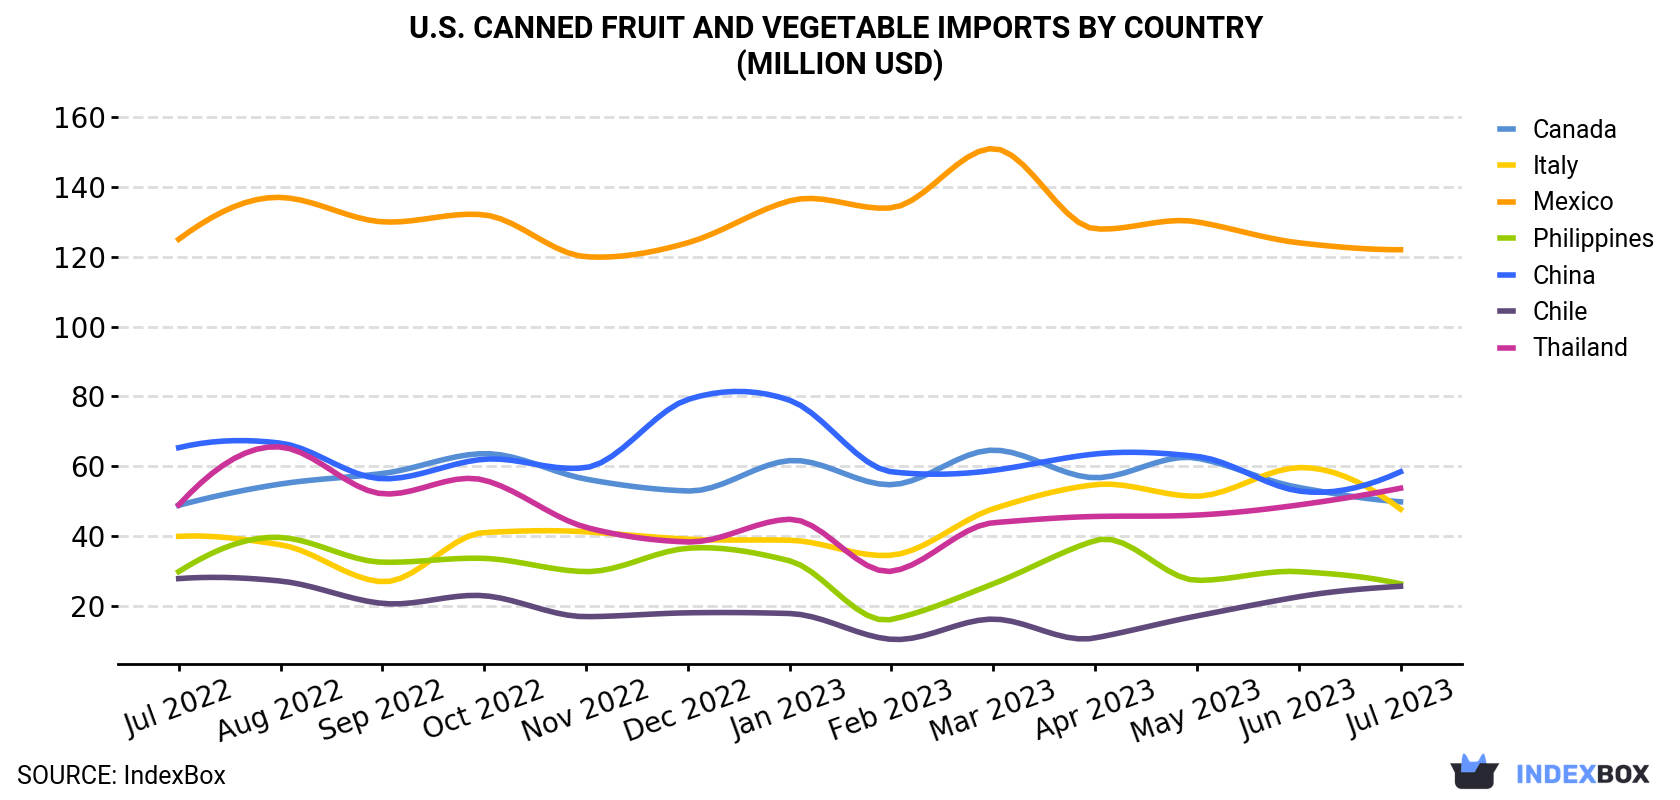 U.S. Canned Fruit And Vegetable Imports By Country (Million USD)